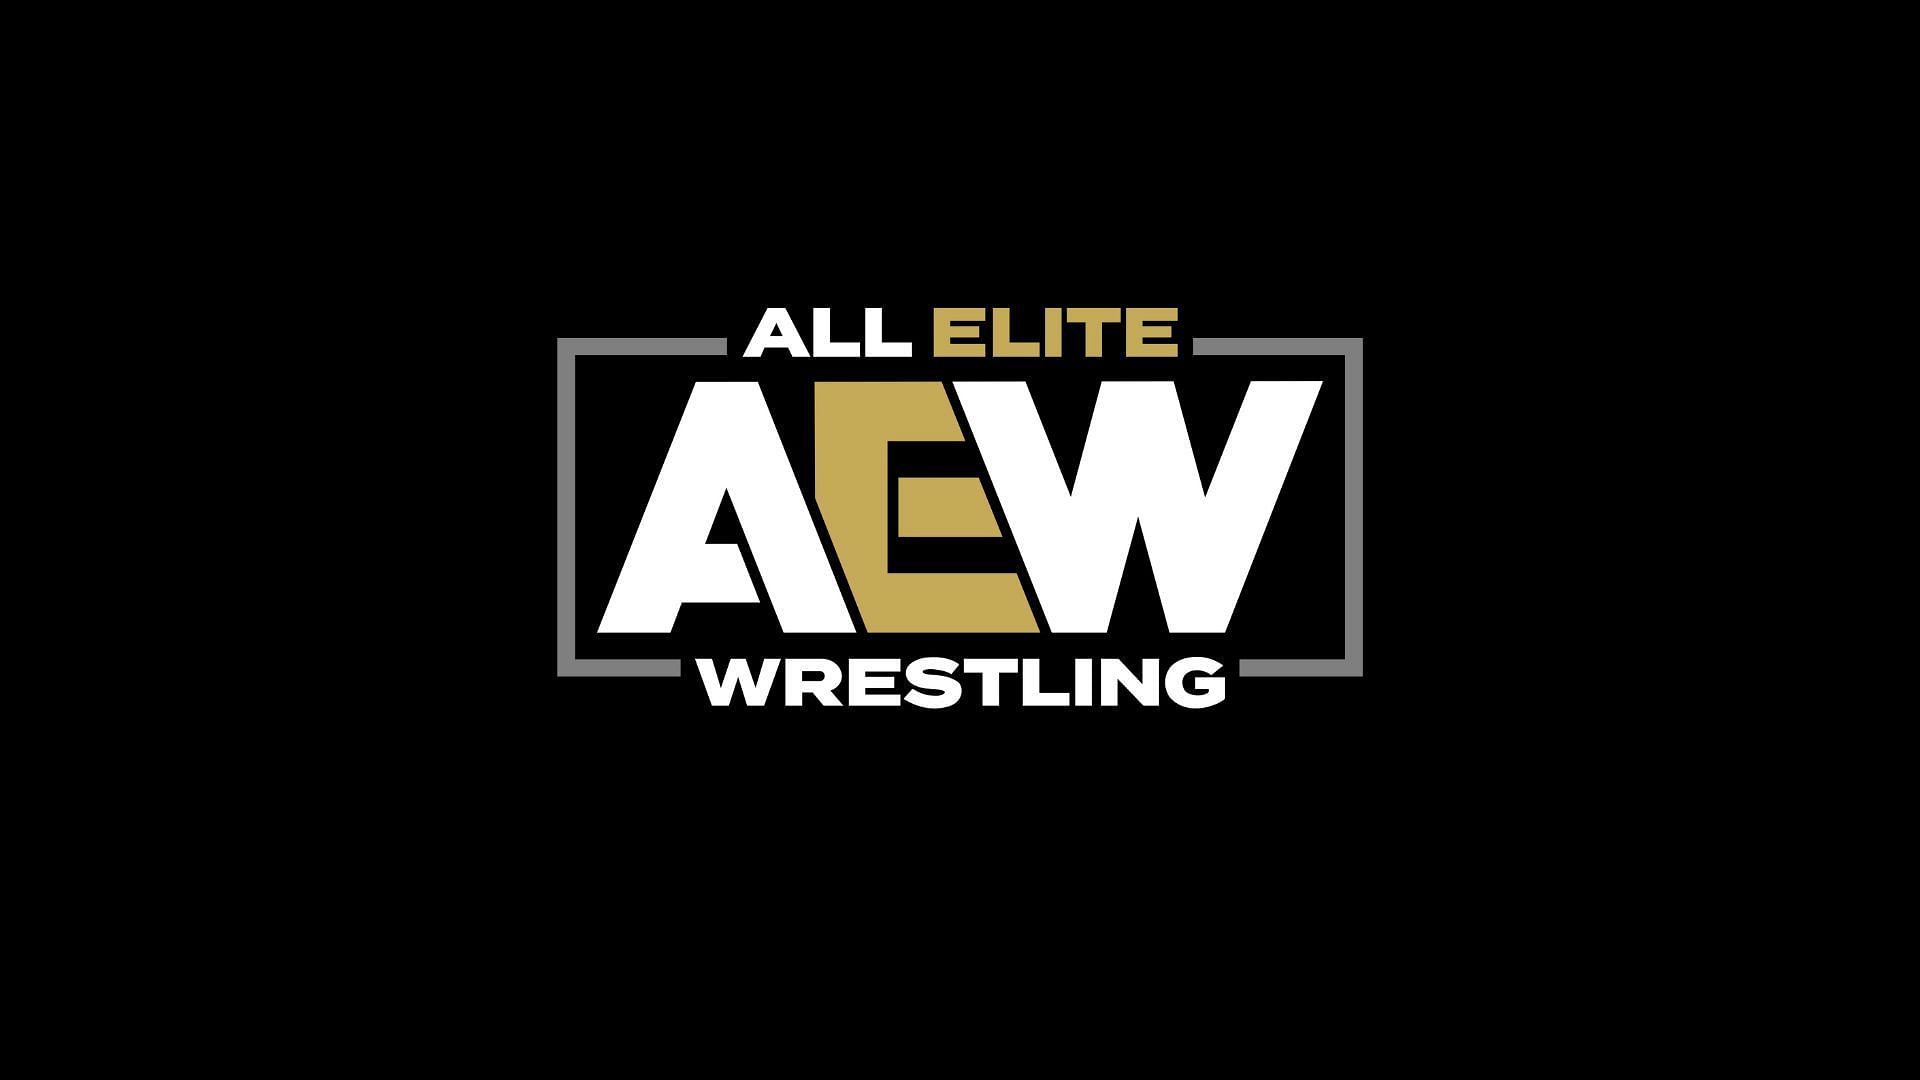 Rumours about an AEW star walking out recently surfaced on social media